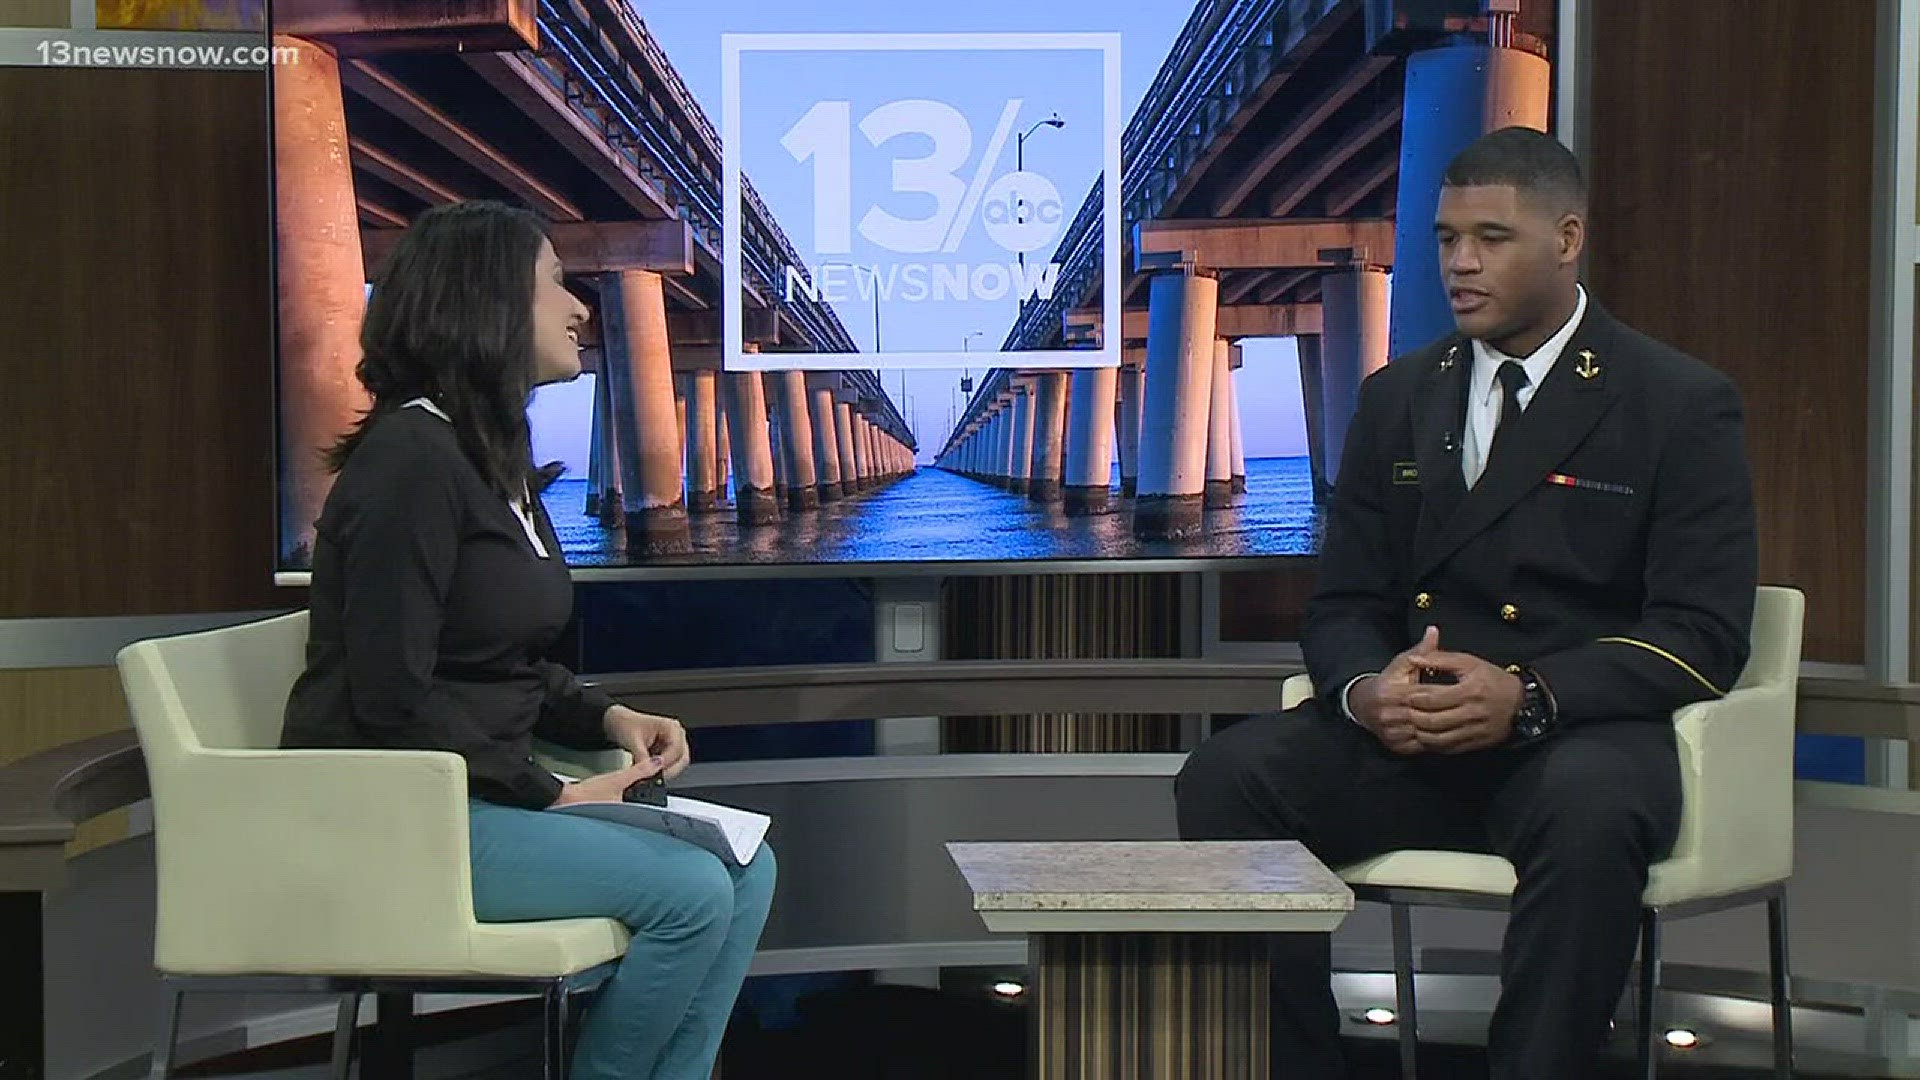 The Naval Academy is trying to recruit high schoolers from the area to go to the academy when they graduate. 13News Now Lucy Bustamante sits down with Midshipman Quintin Brown.